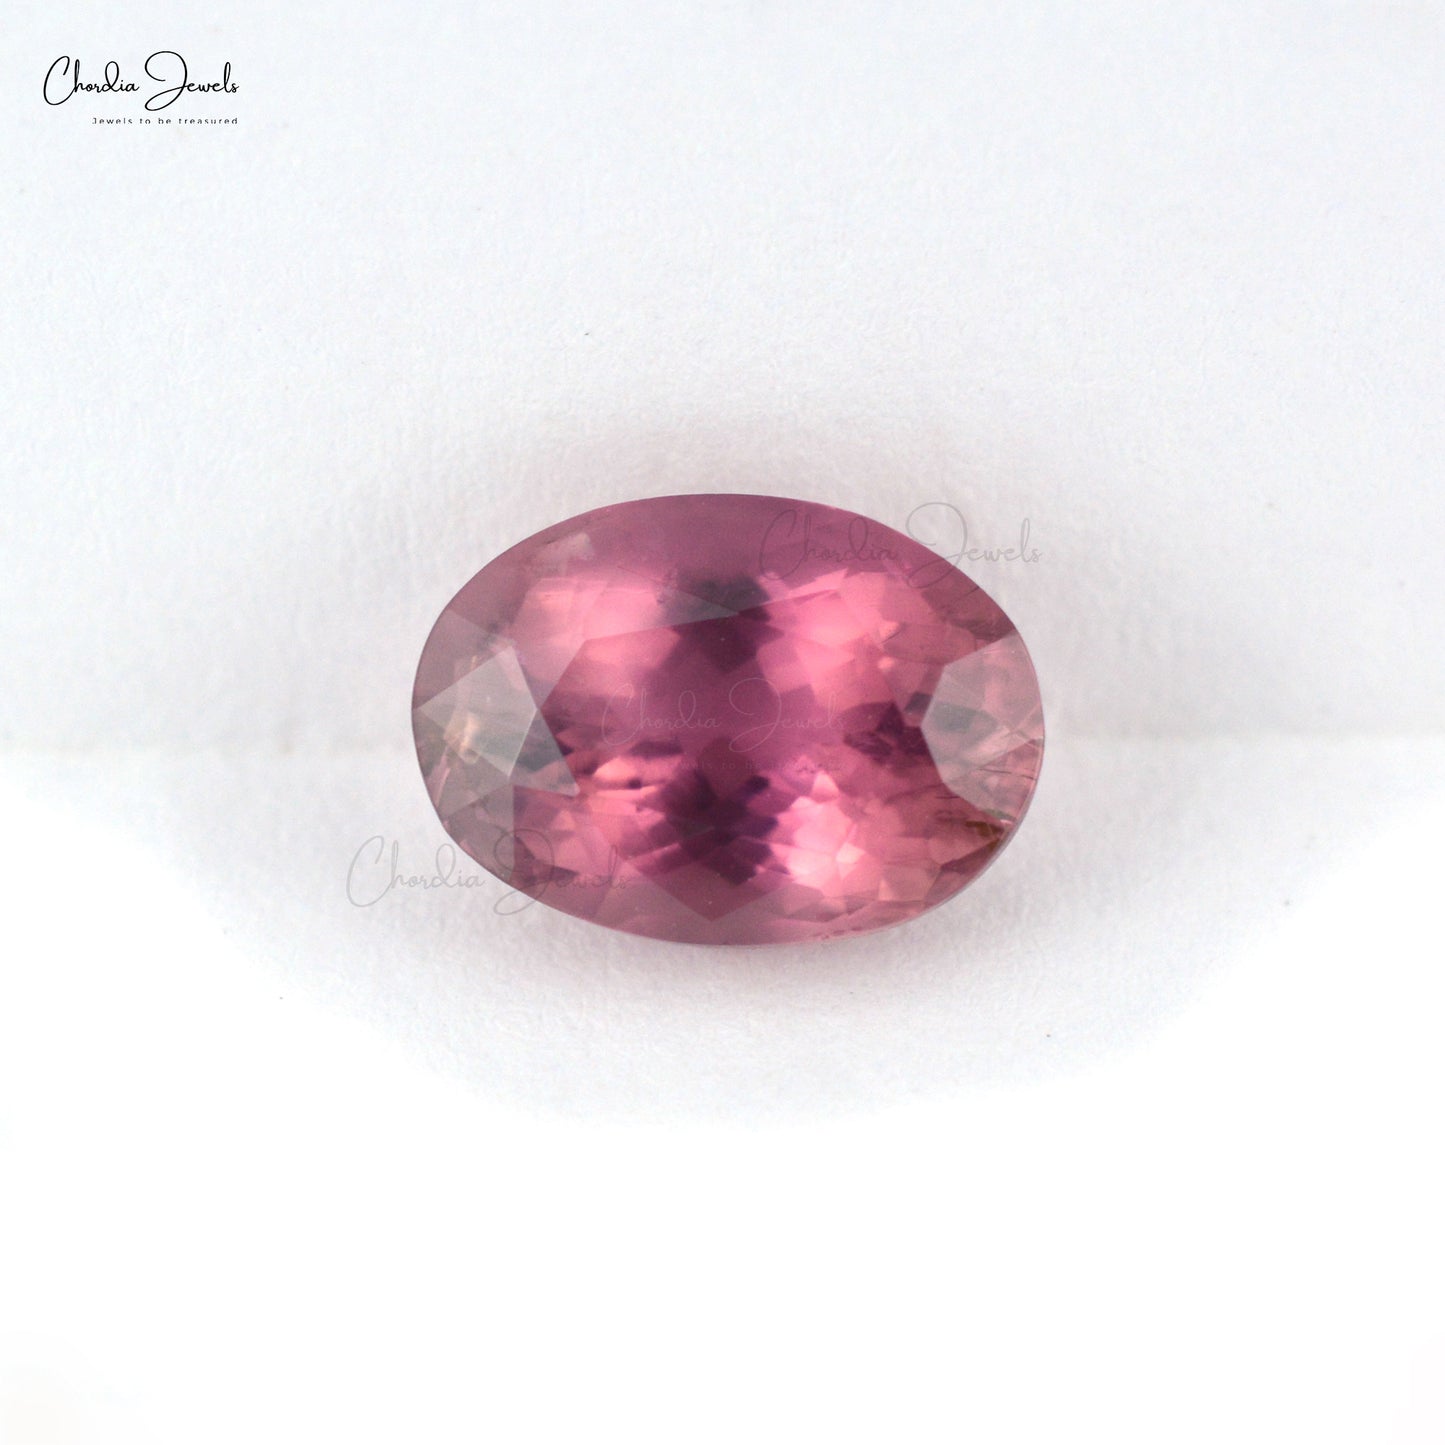 Fine Quality 10.50x7.50 MM Pink Tourmaline A Grade Oval Faceted Gemstone, 1 Piece